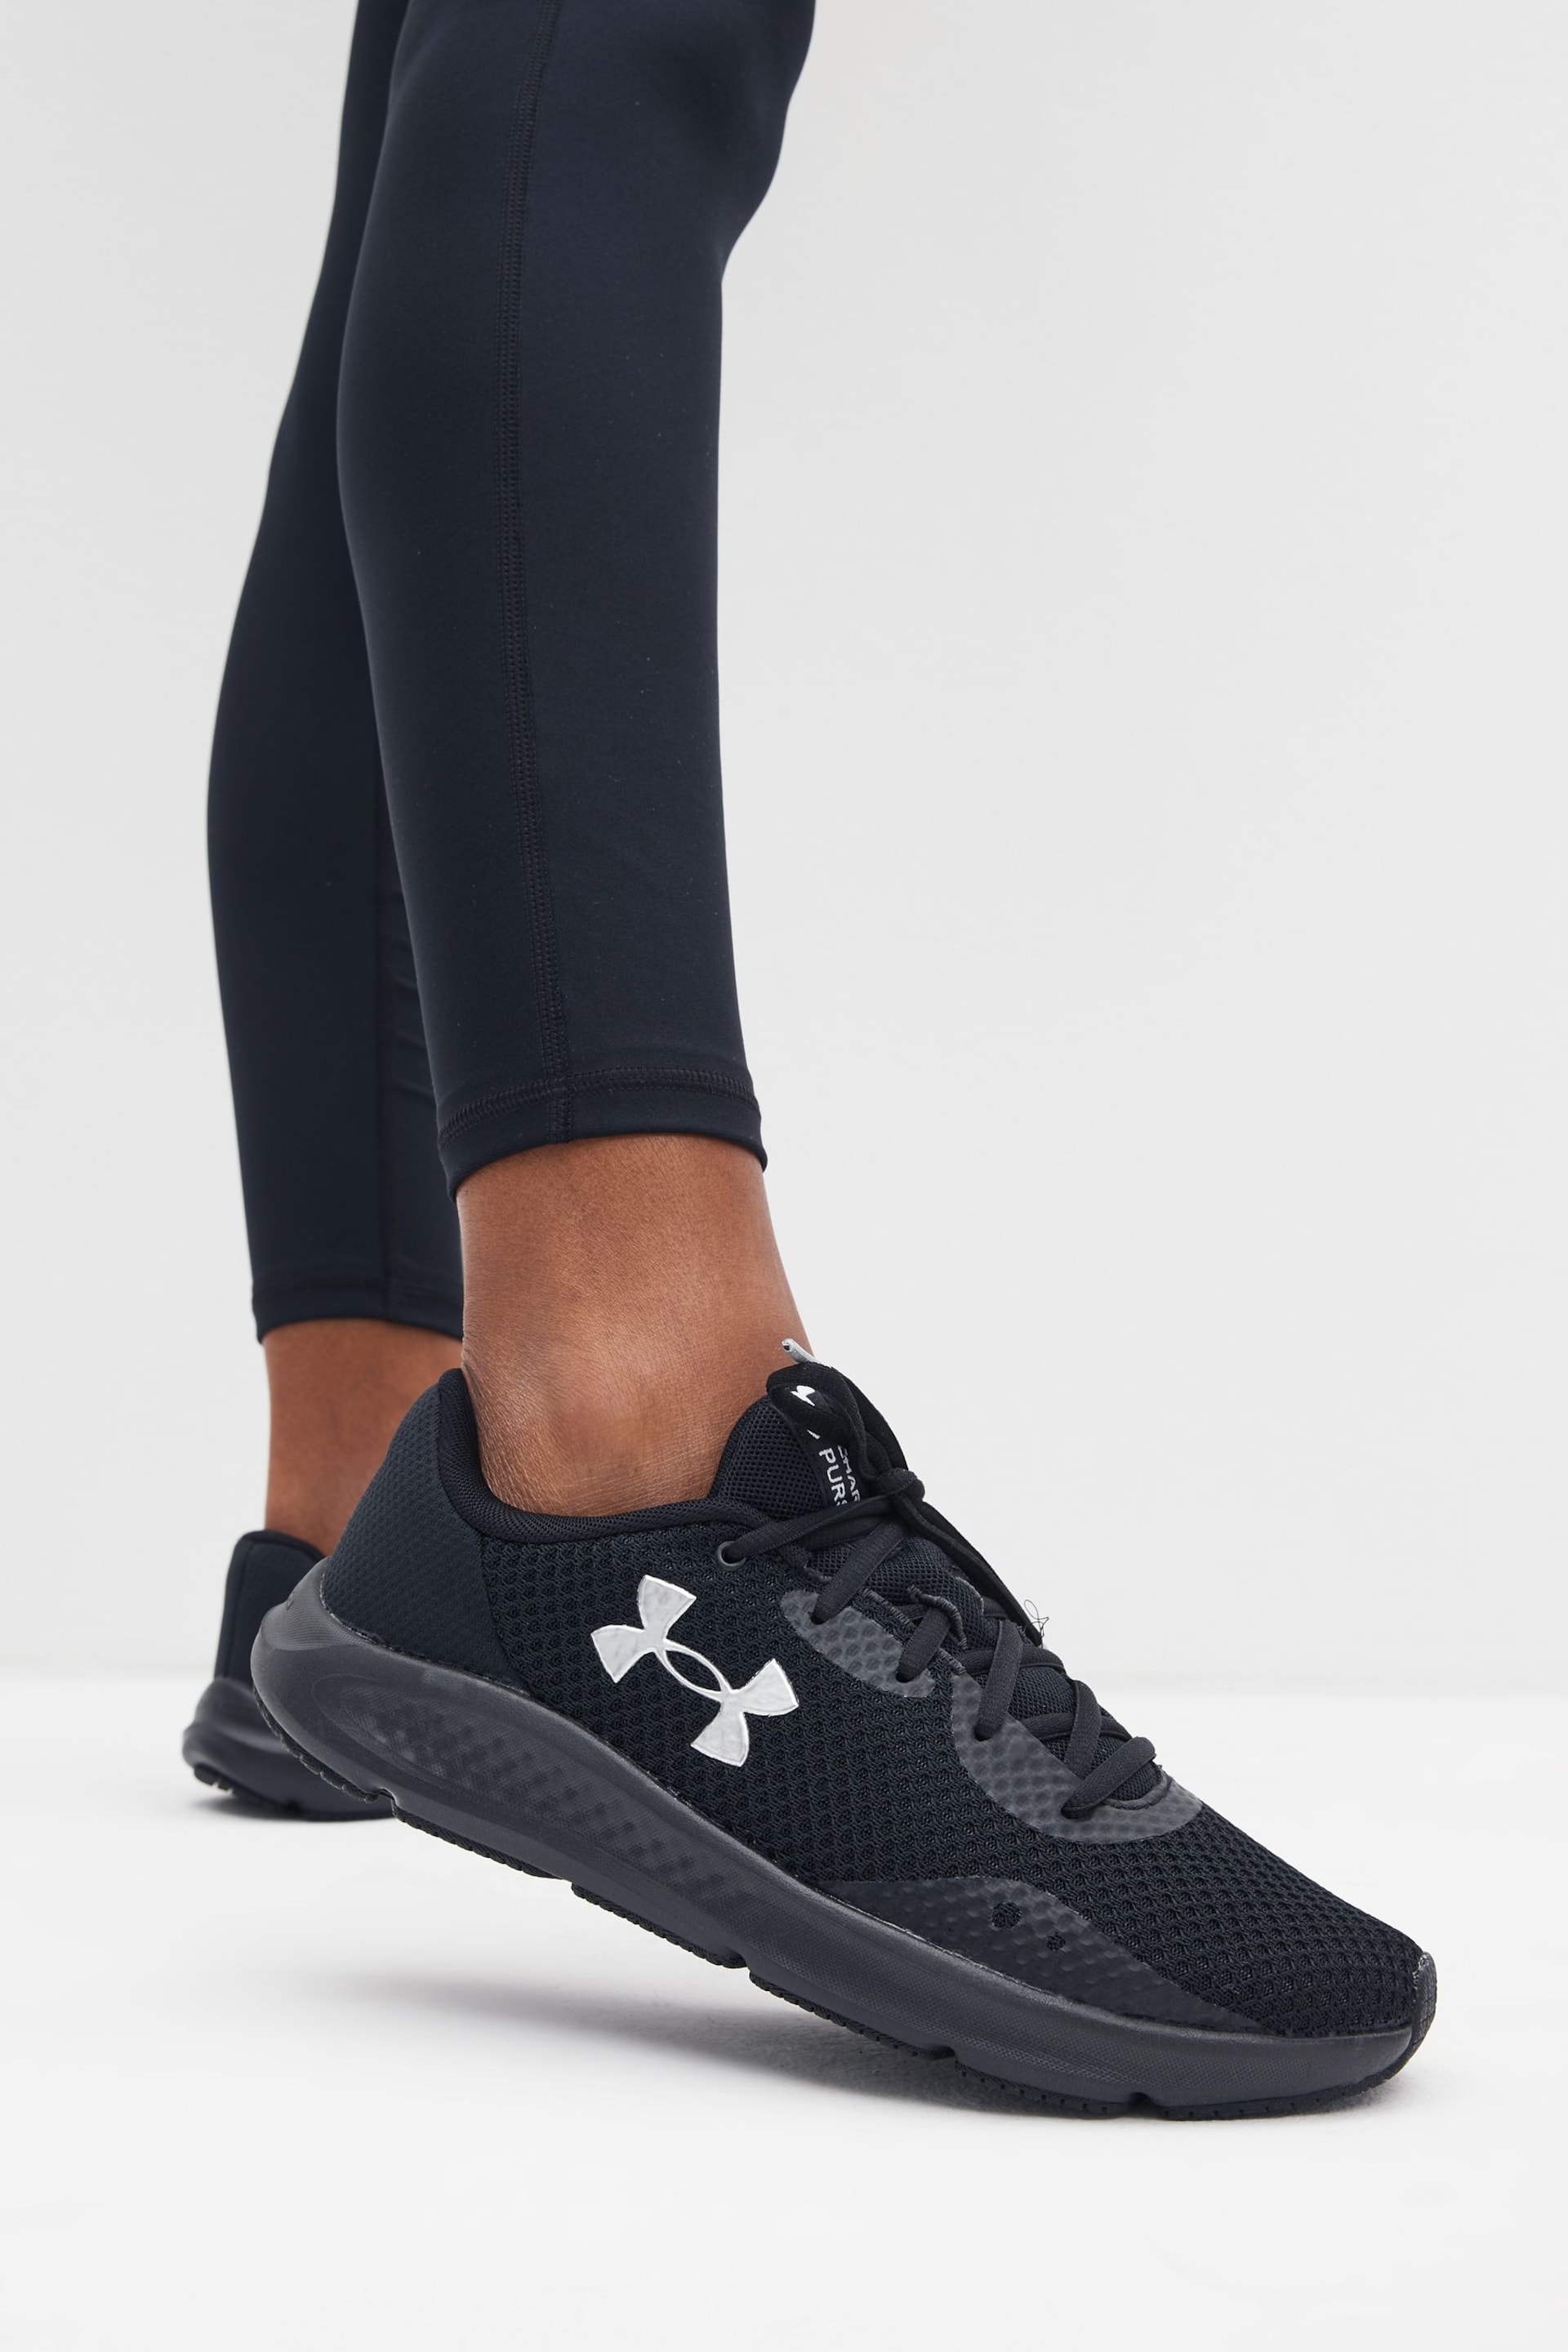 Under Armour Dark Black Charged Pursuit 3 Trainers - Image 1 of 8